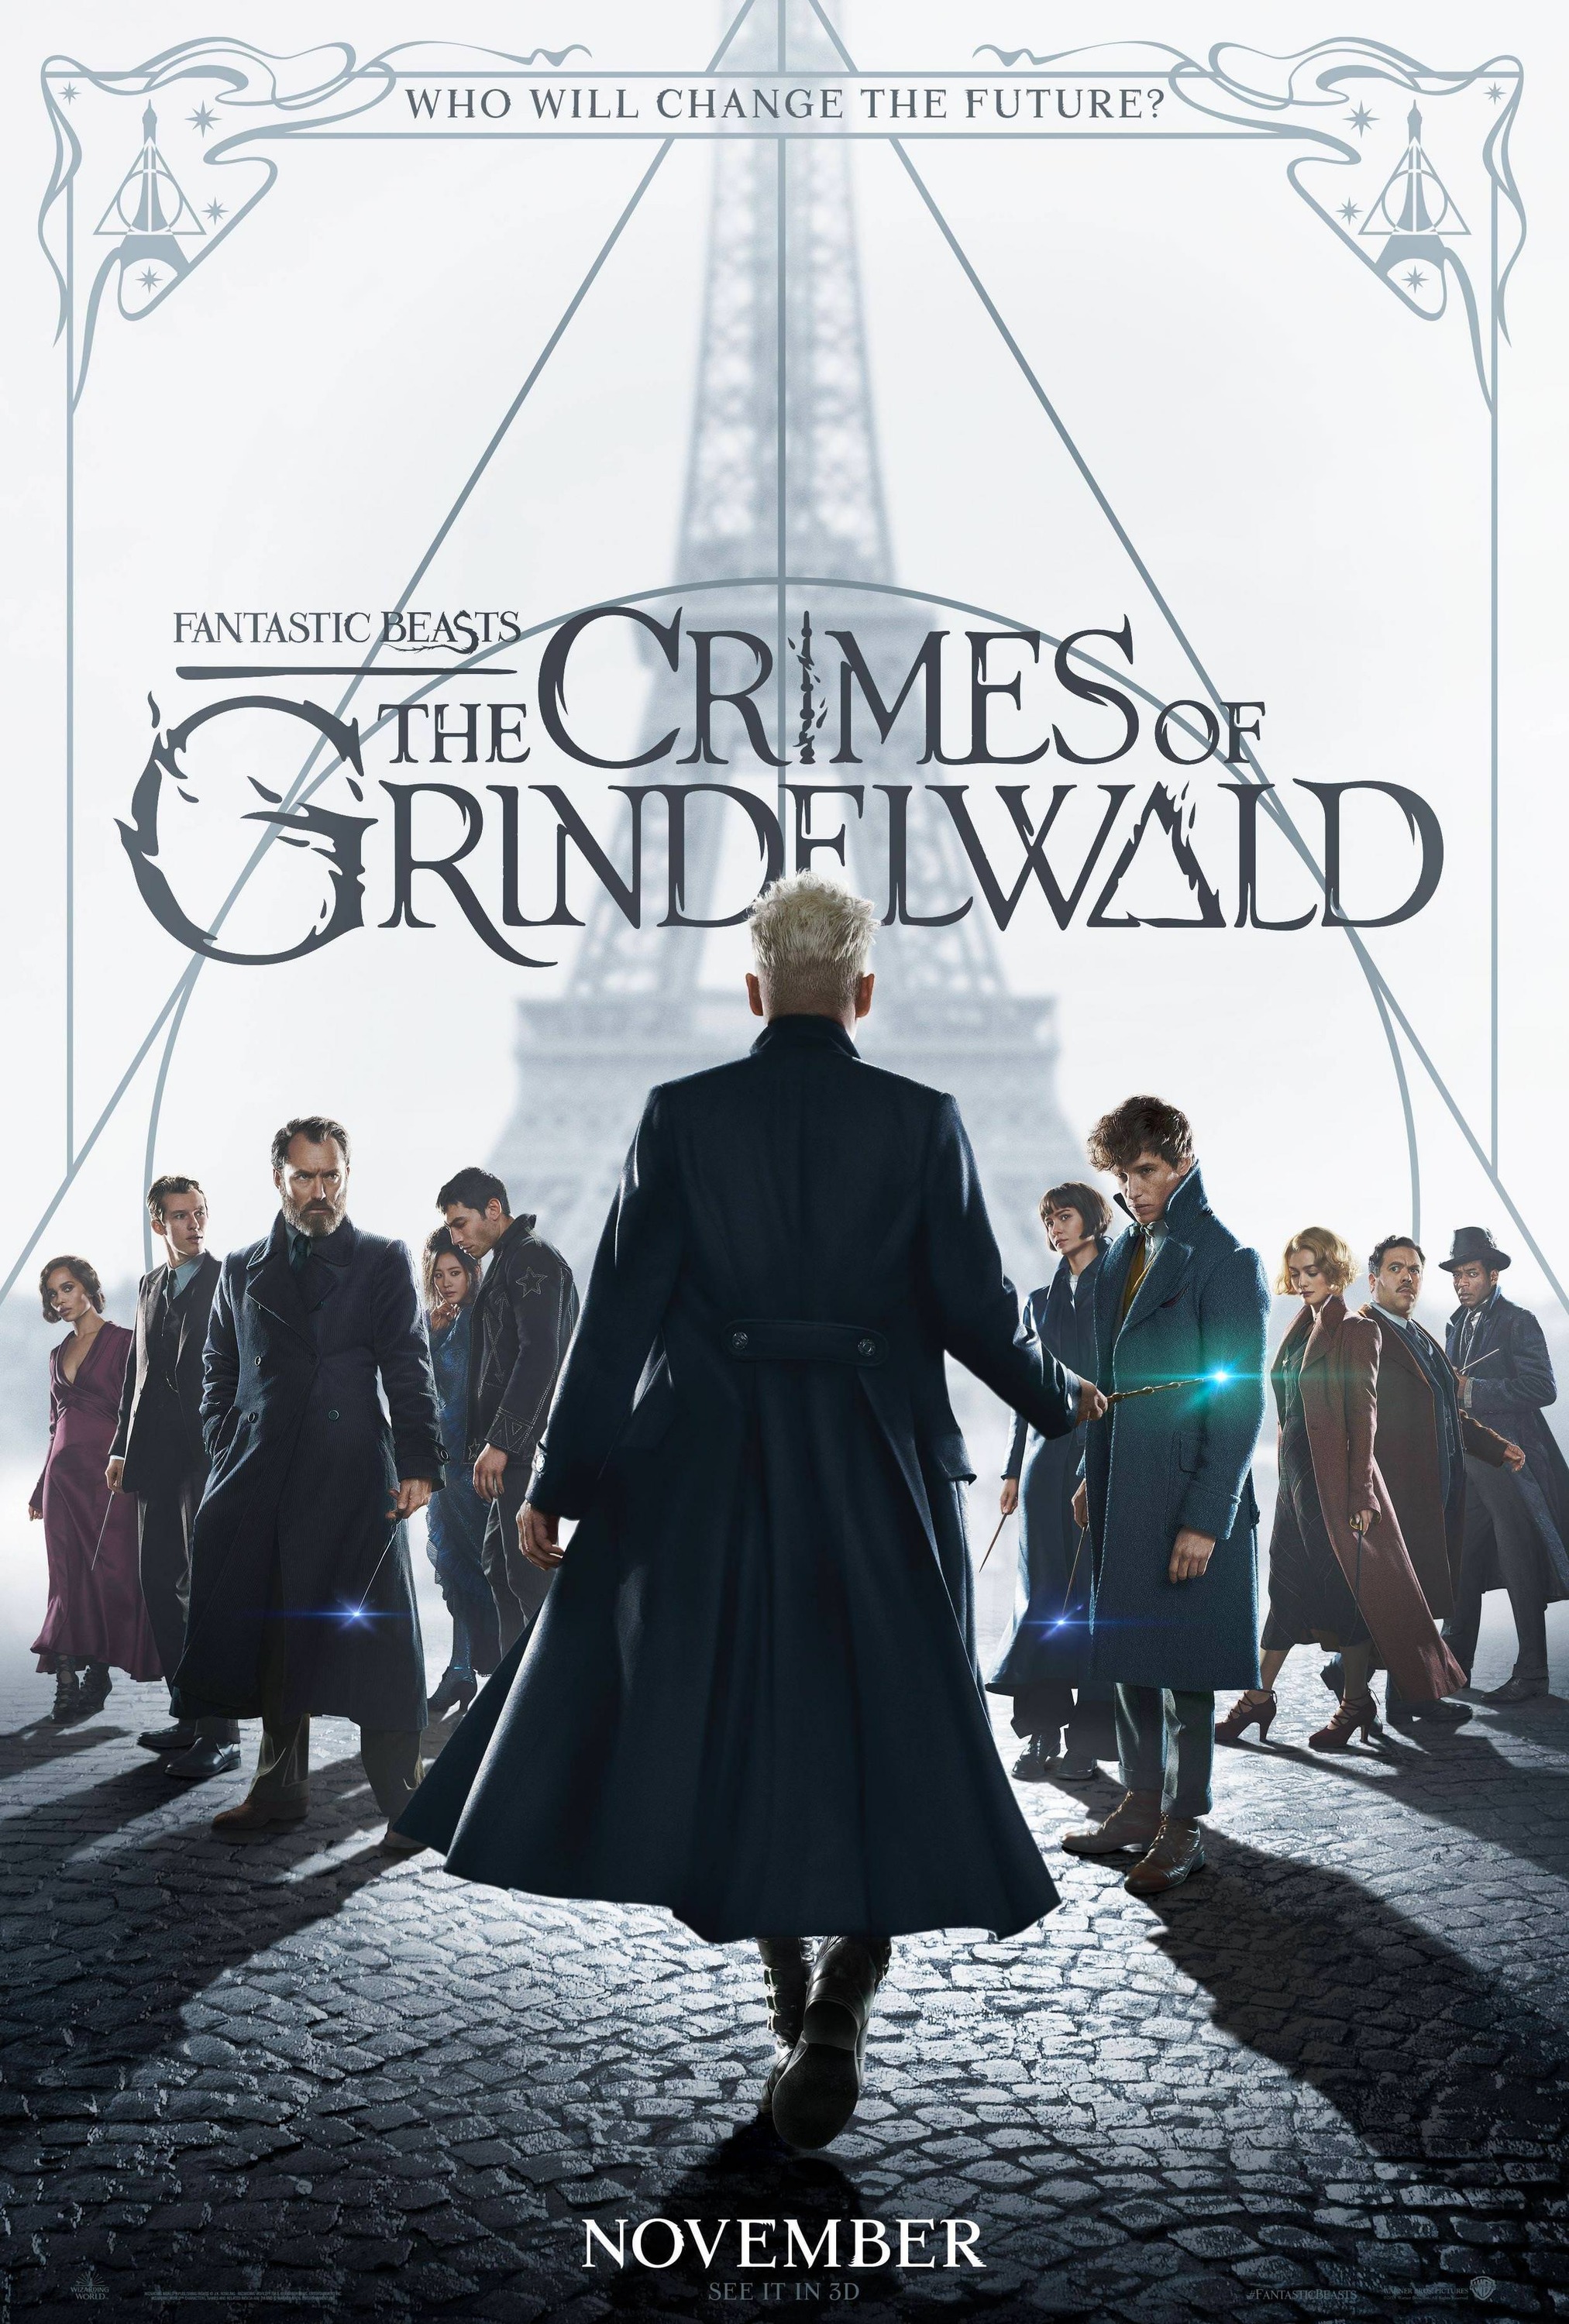 Mega Sized Movie Poster Image for Fantastic Beasts: The Crimes of Grindelwald (#14 of 32)